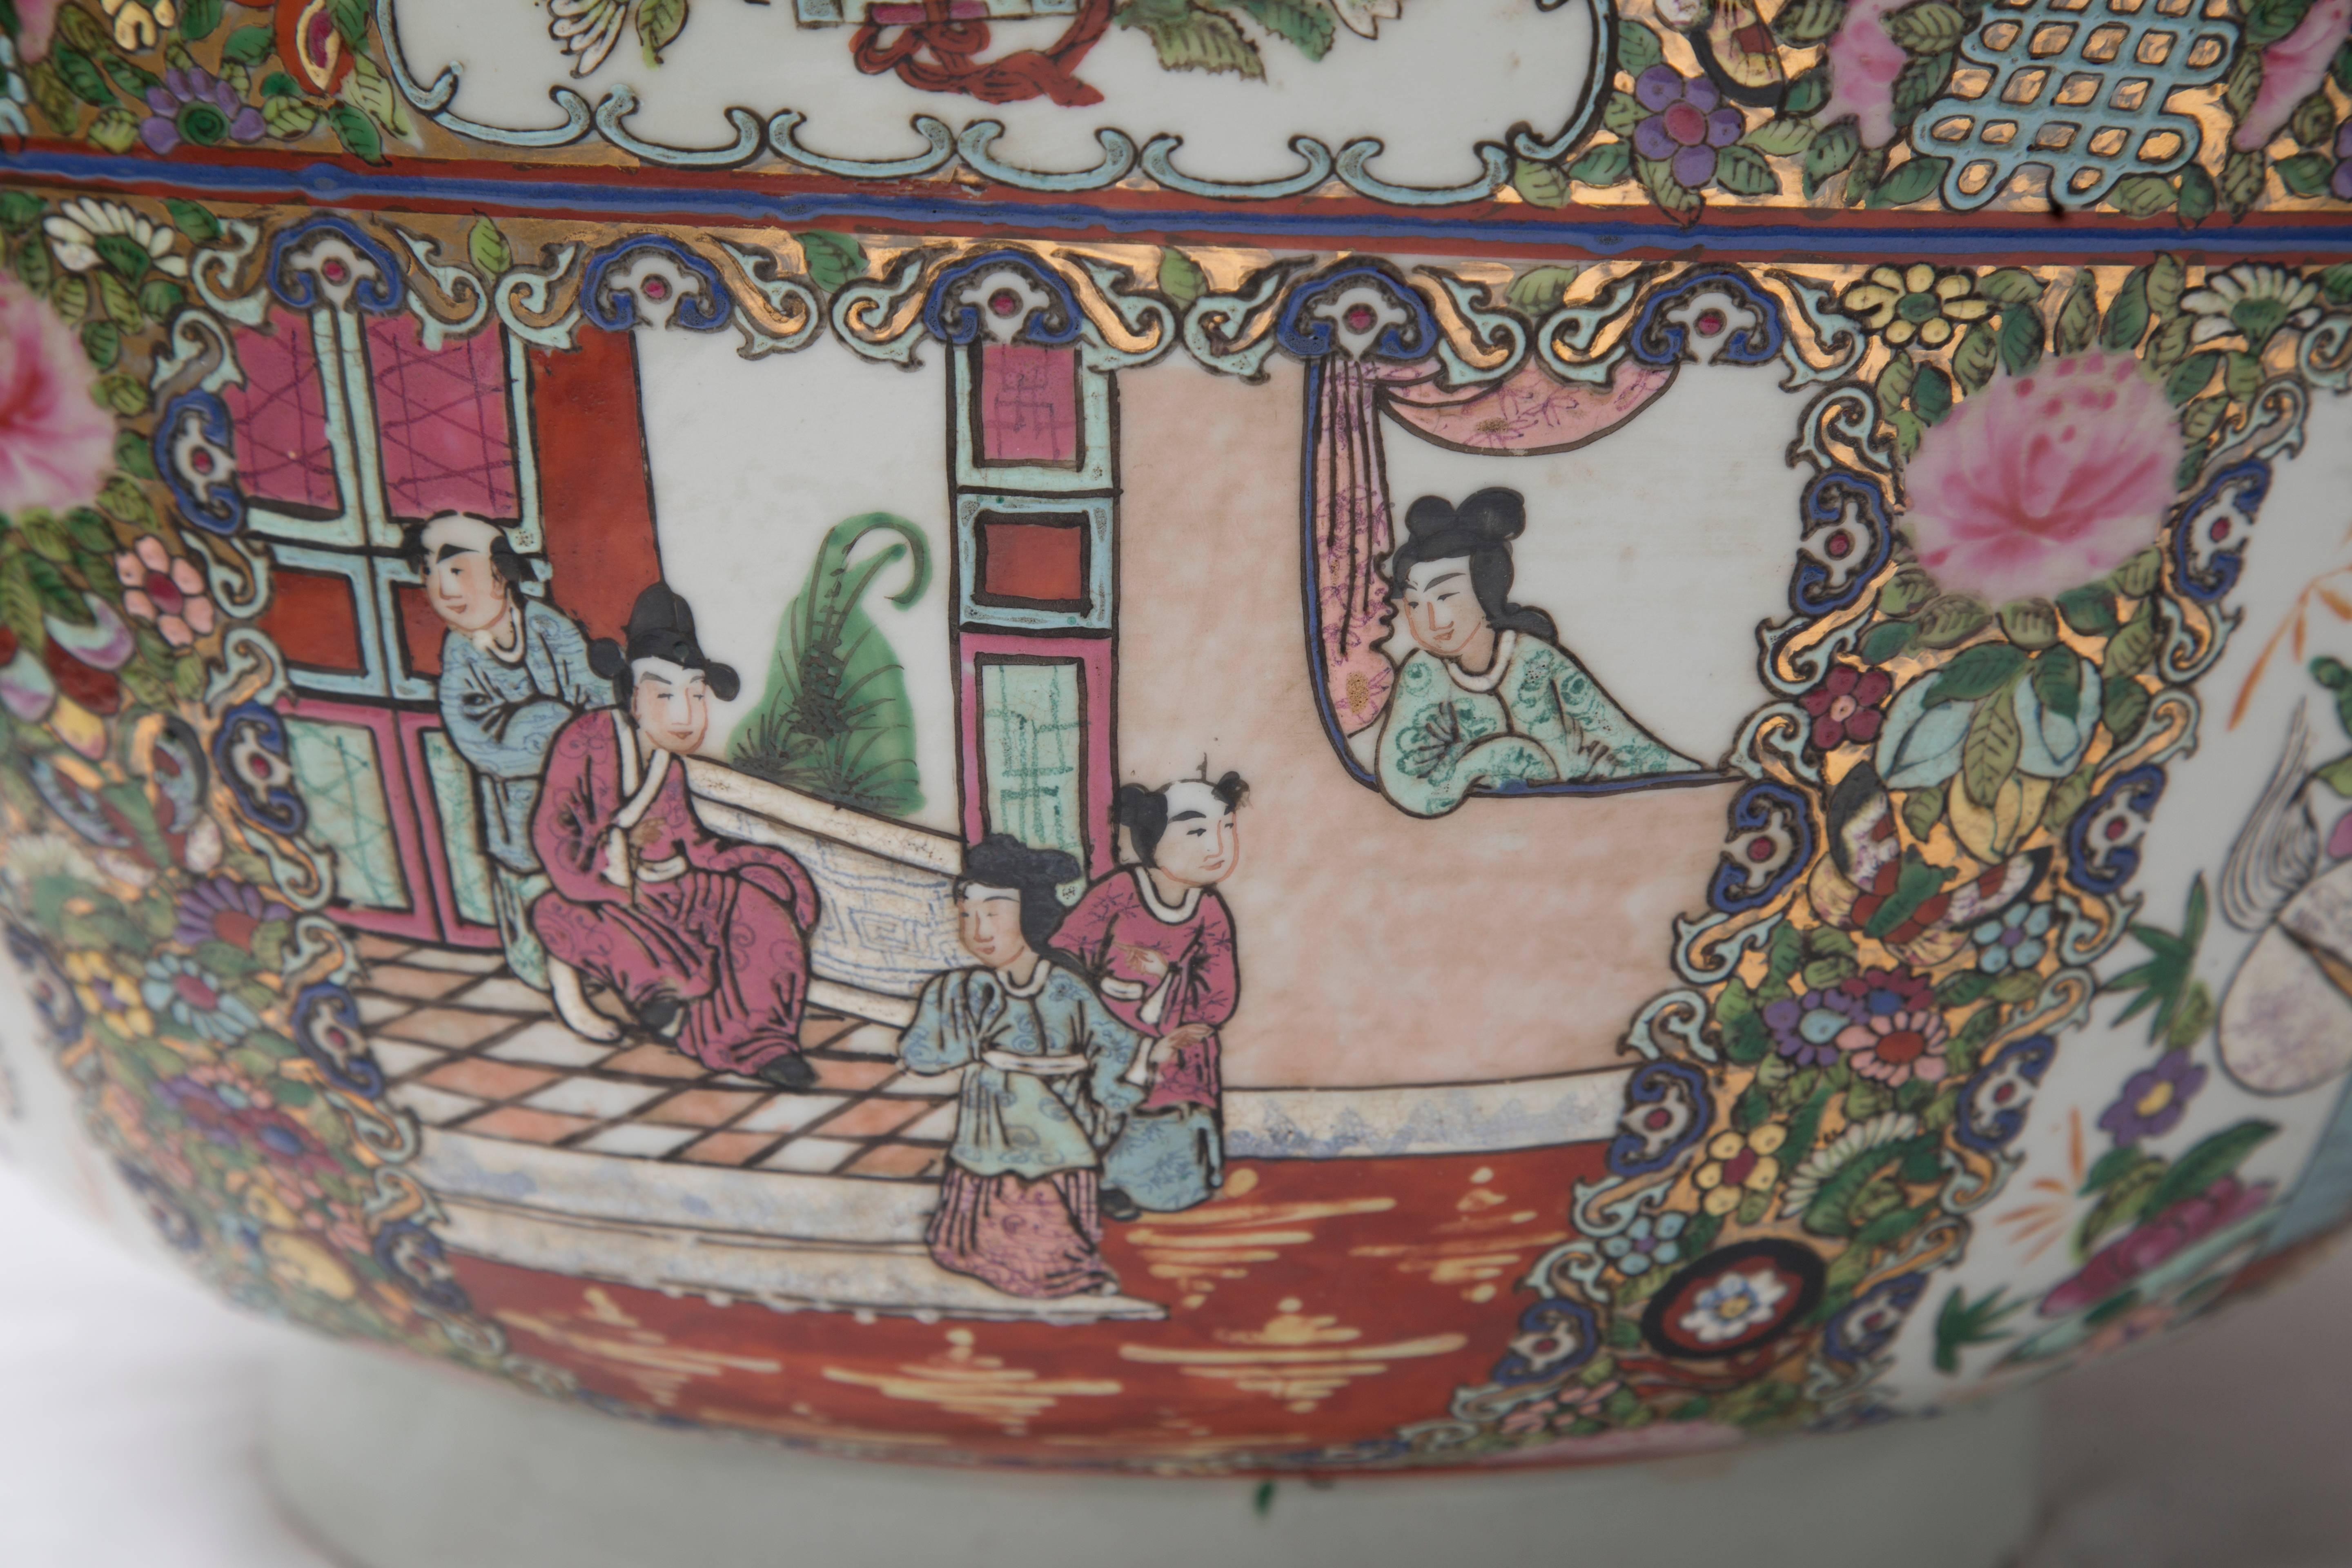 This is a Classic Chinese punch bowl with mandarin court scenes and a variety of decorative panels, inside and out, 20th century.